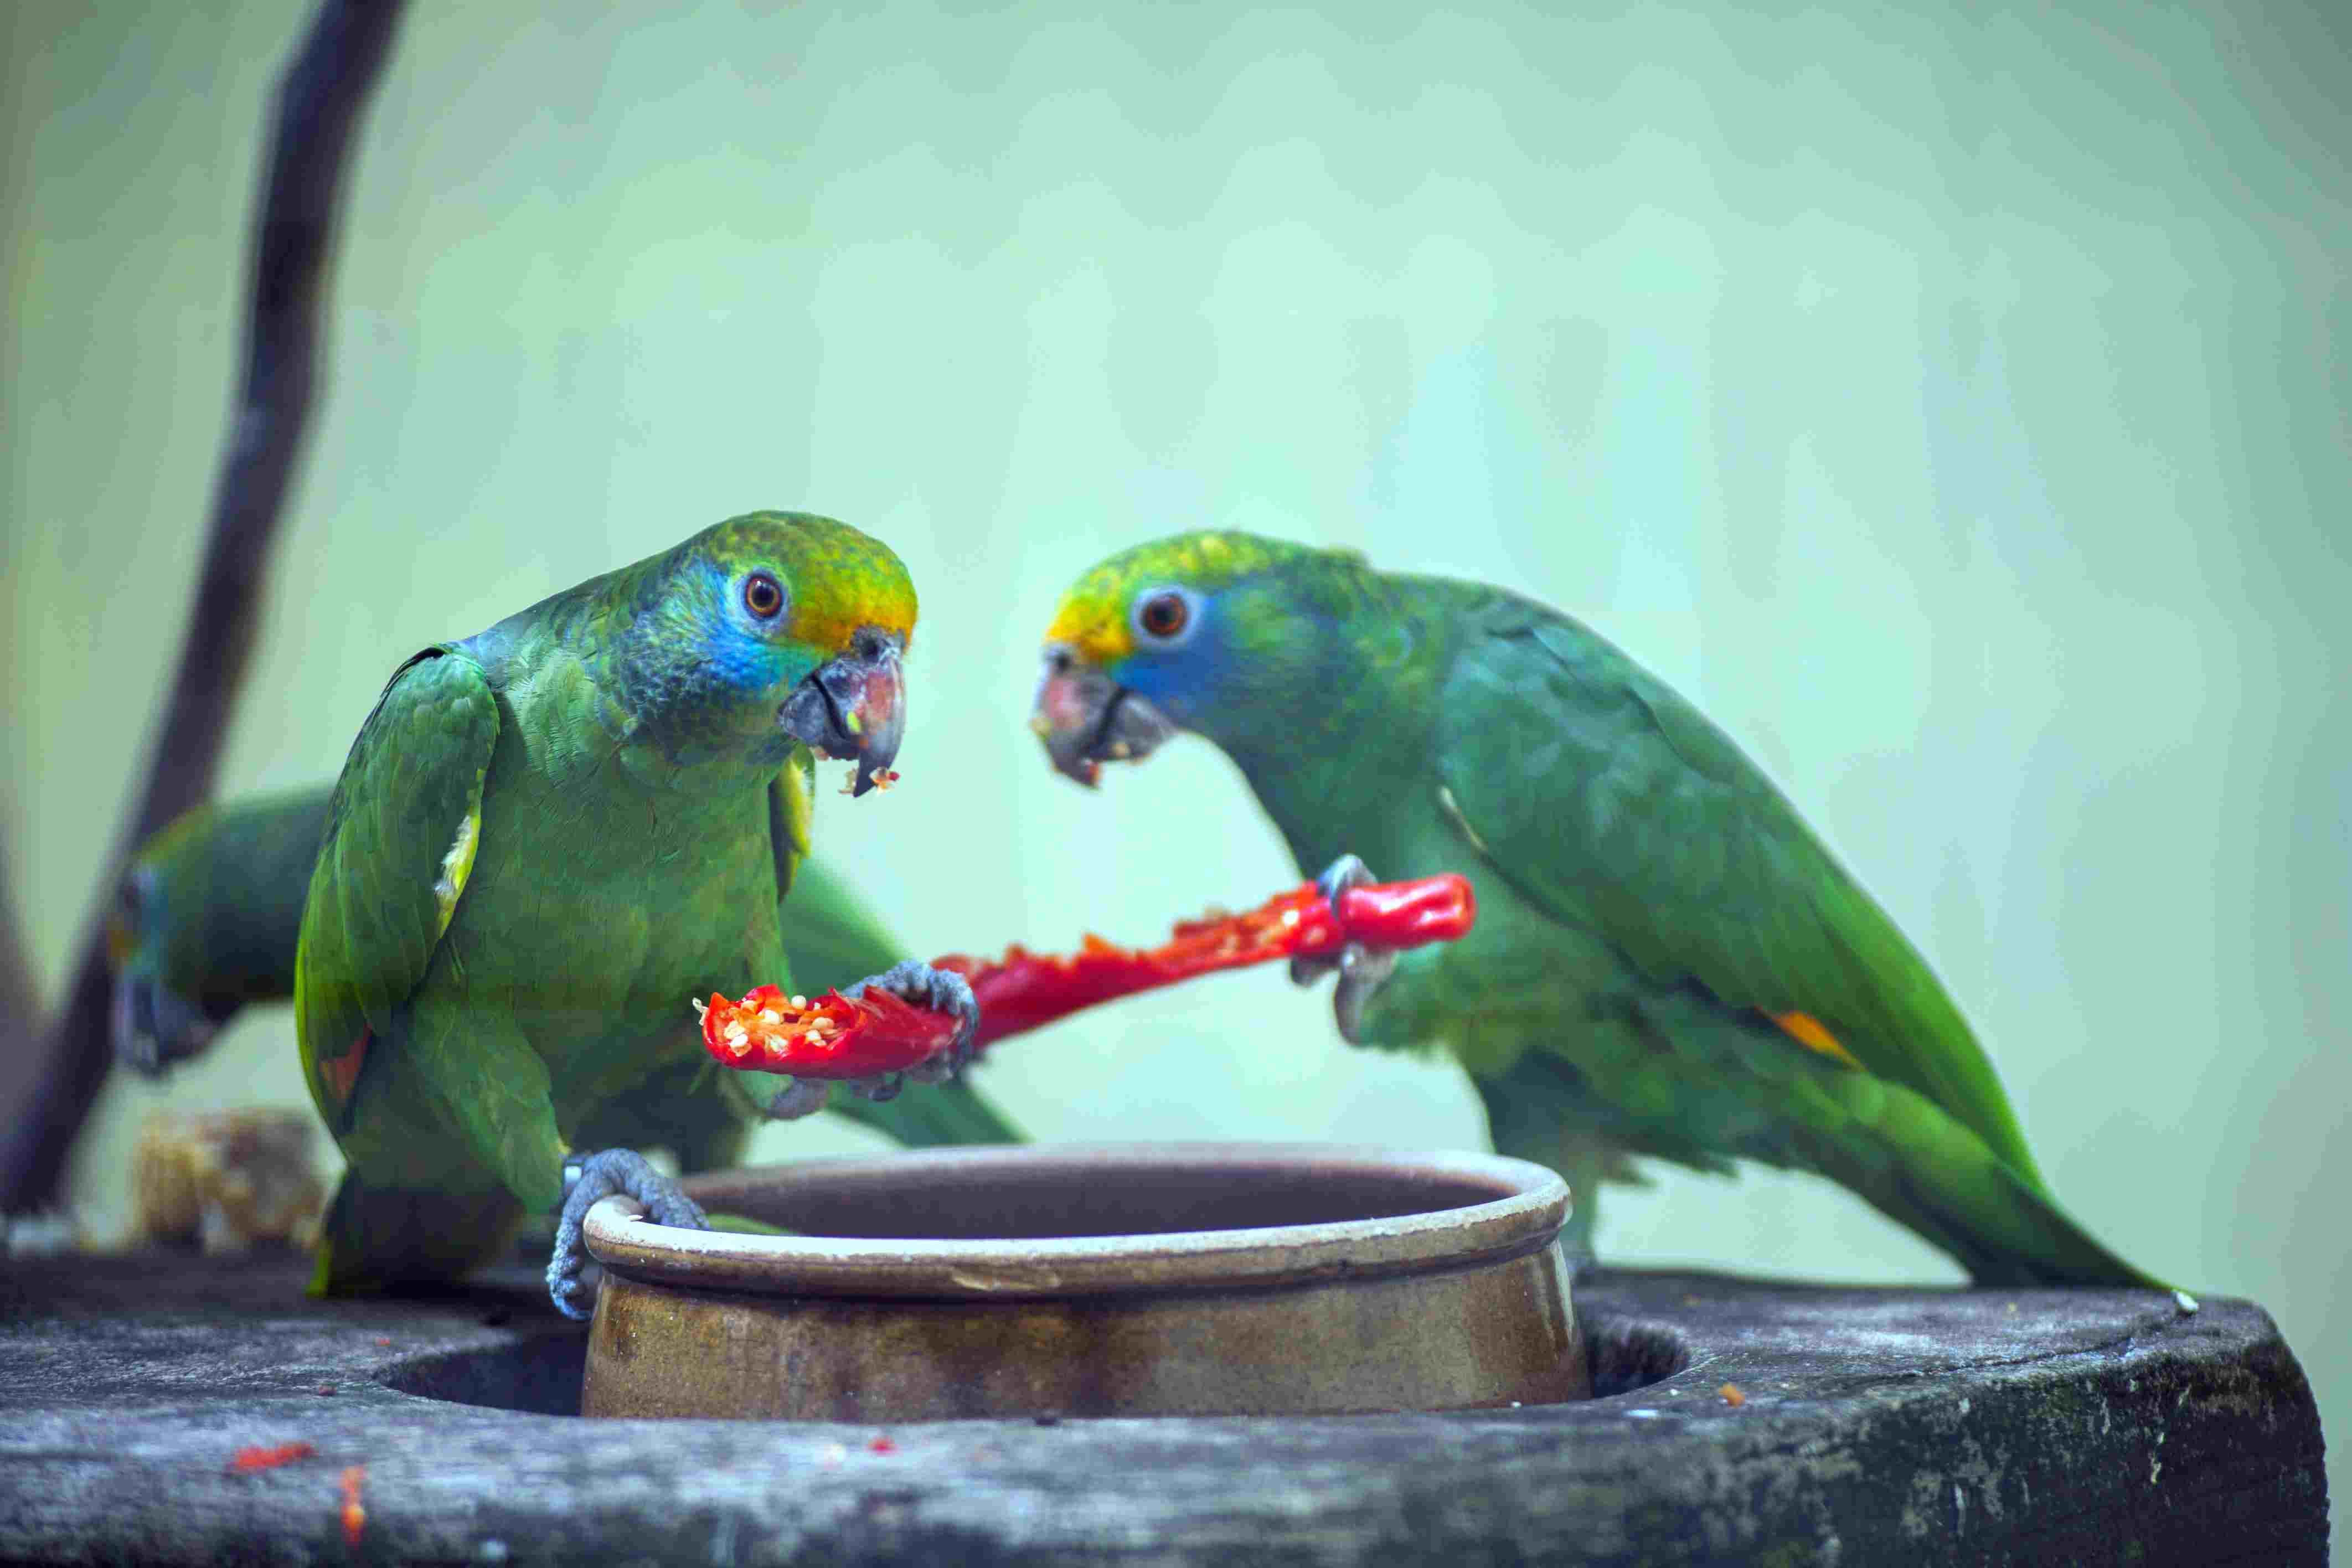 Parrots eating a chili pepper in cage